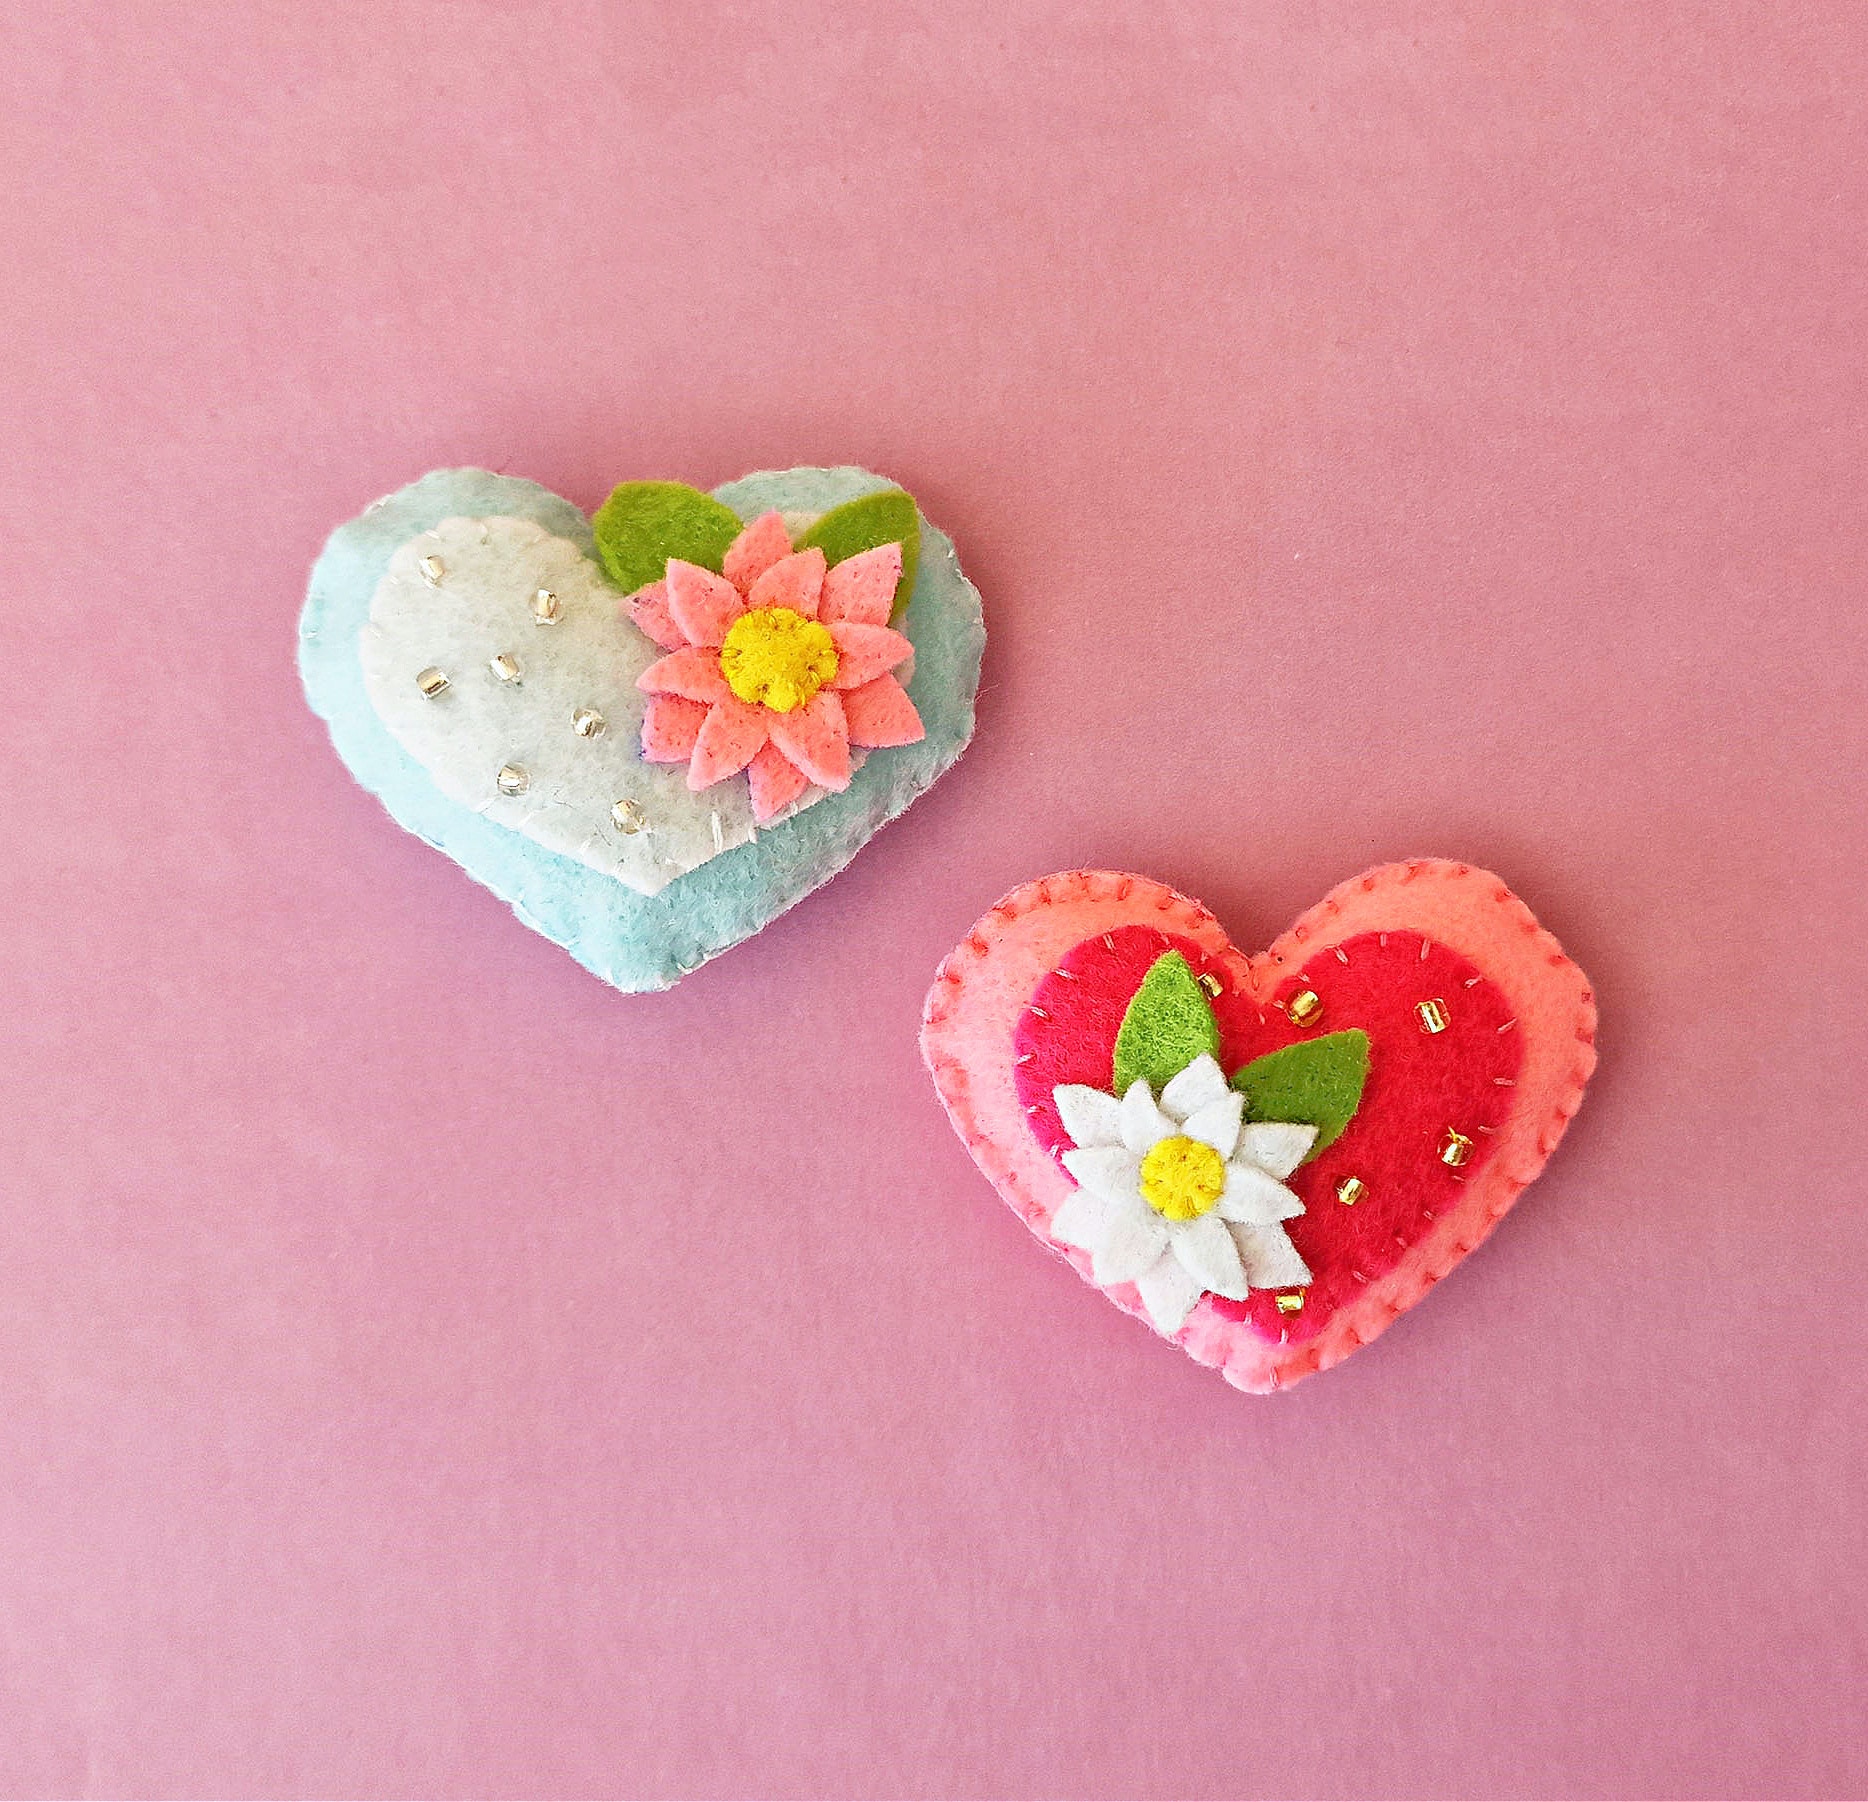 Two heart shaped felt brooches on a pink background.